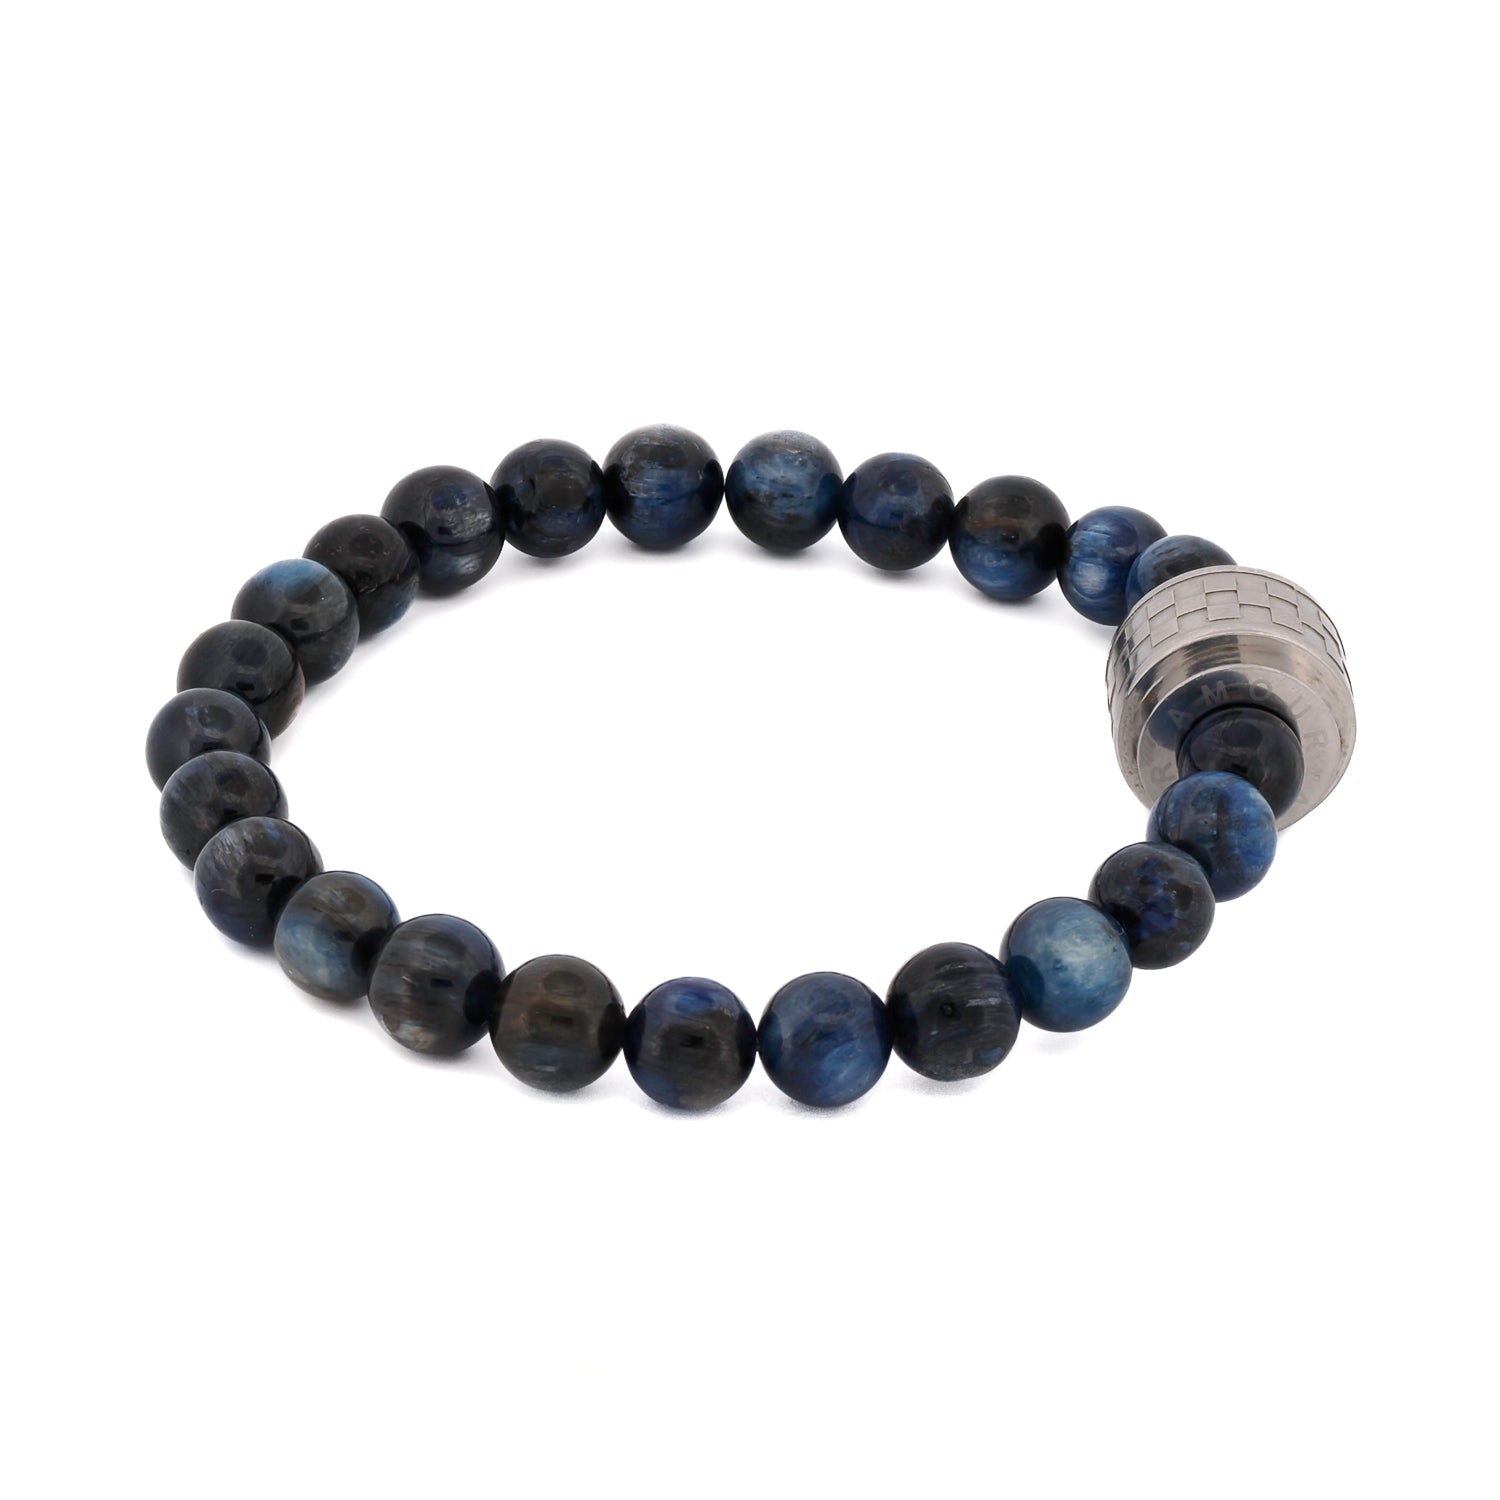 Stylish Silver Amour Bracelet with a stainless steel Amour bead and blue tiger's eye beads, perfect for special occasions